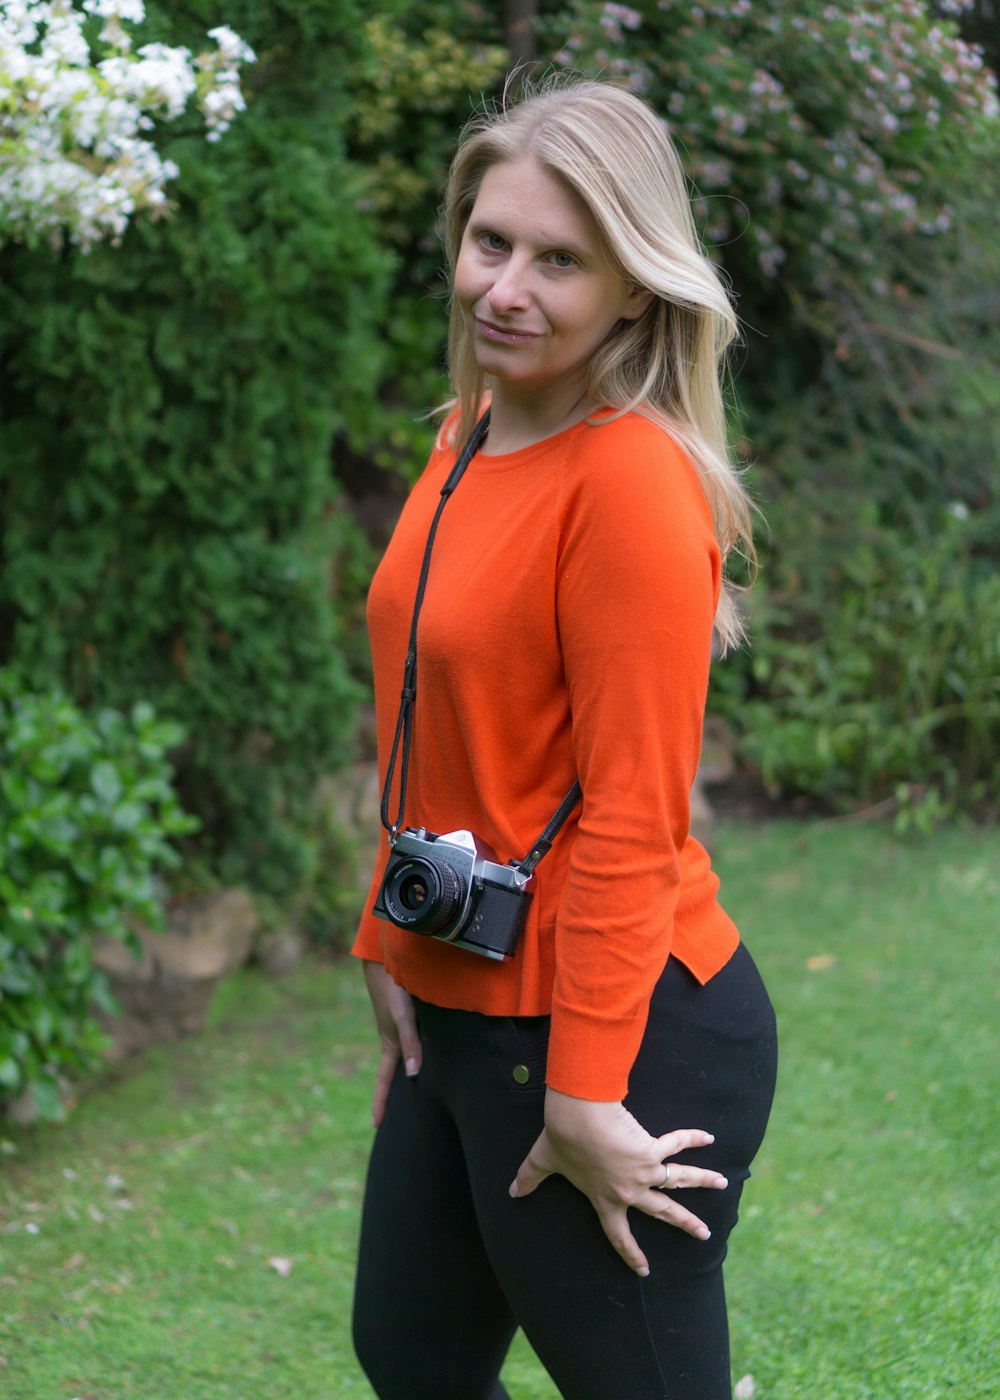 woman in red long sleeve shirt and black pants standing on green grass field during daytime